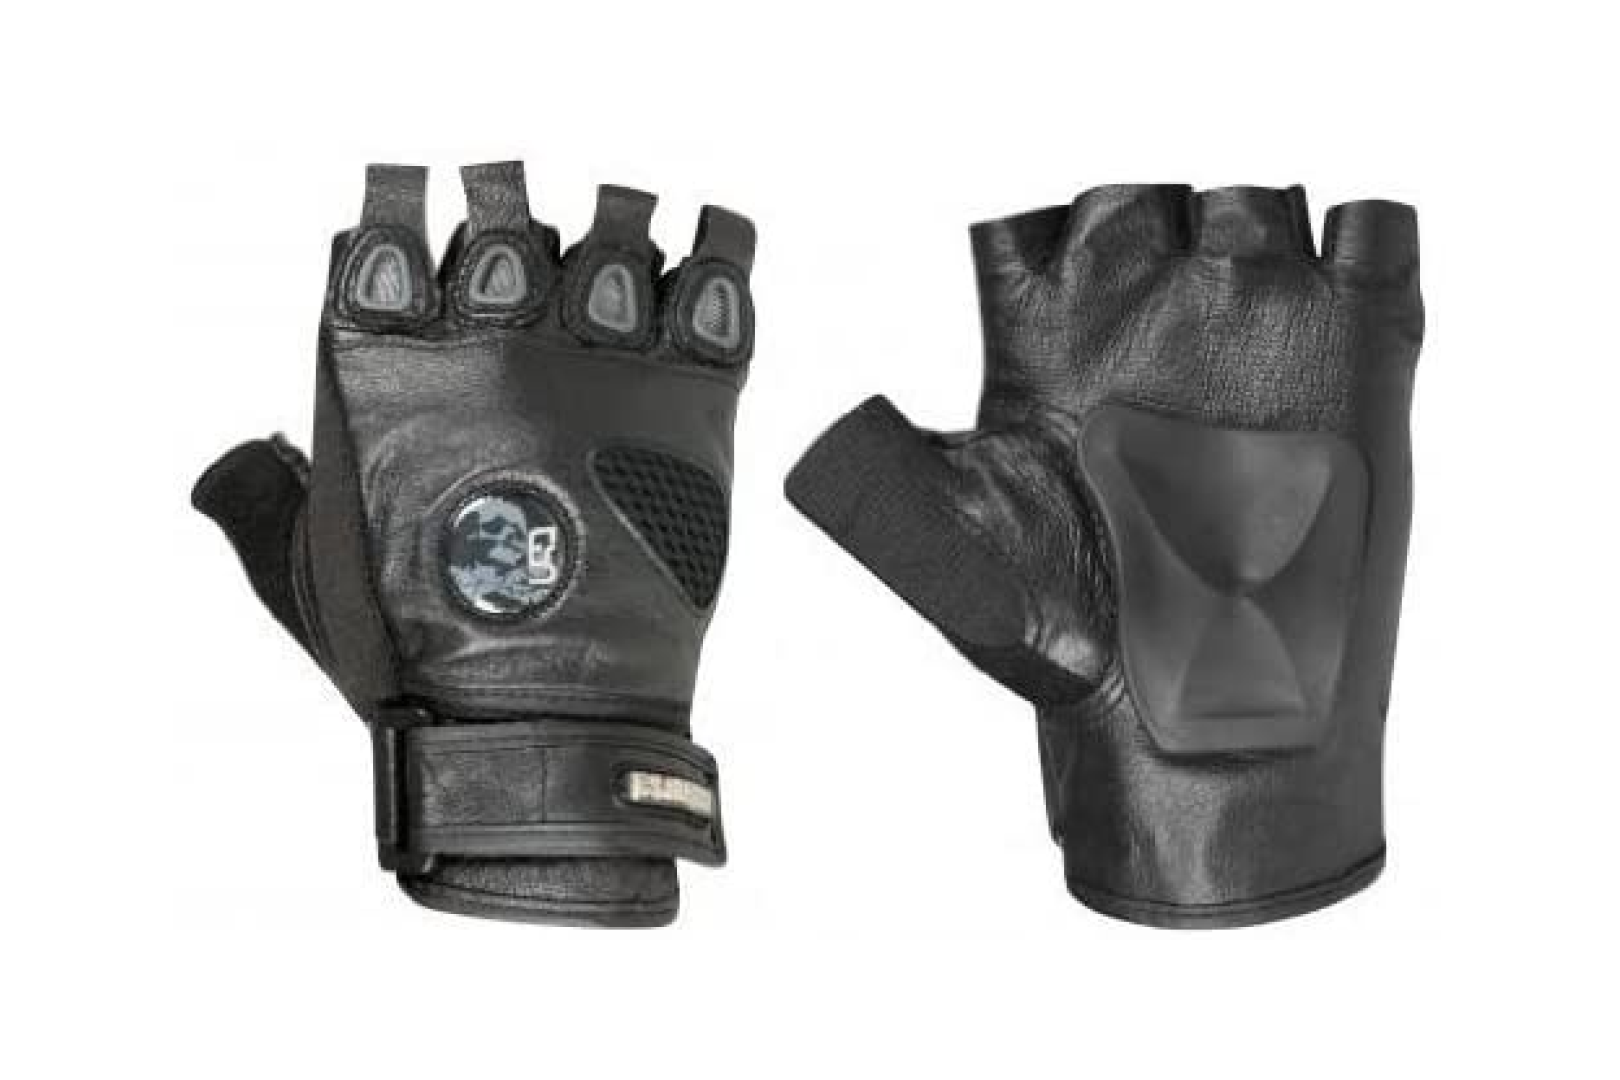 USD Extreme Gloves by Powerslide